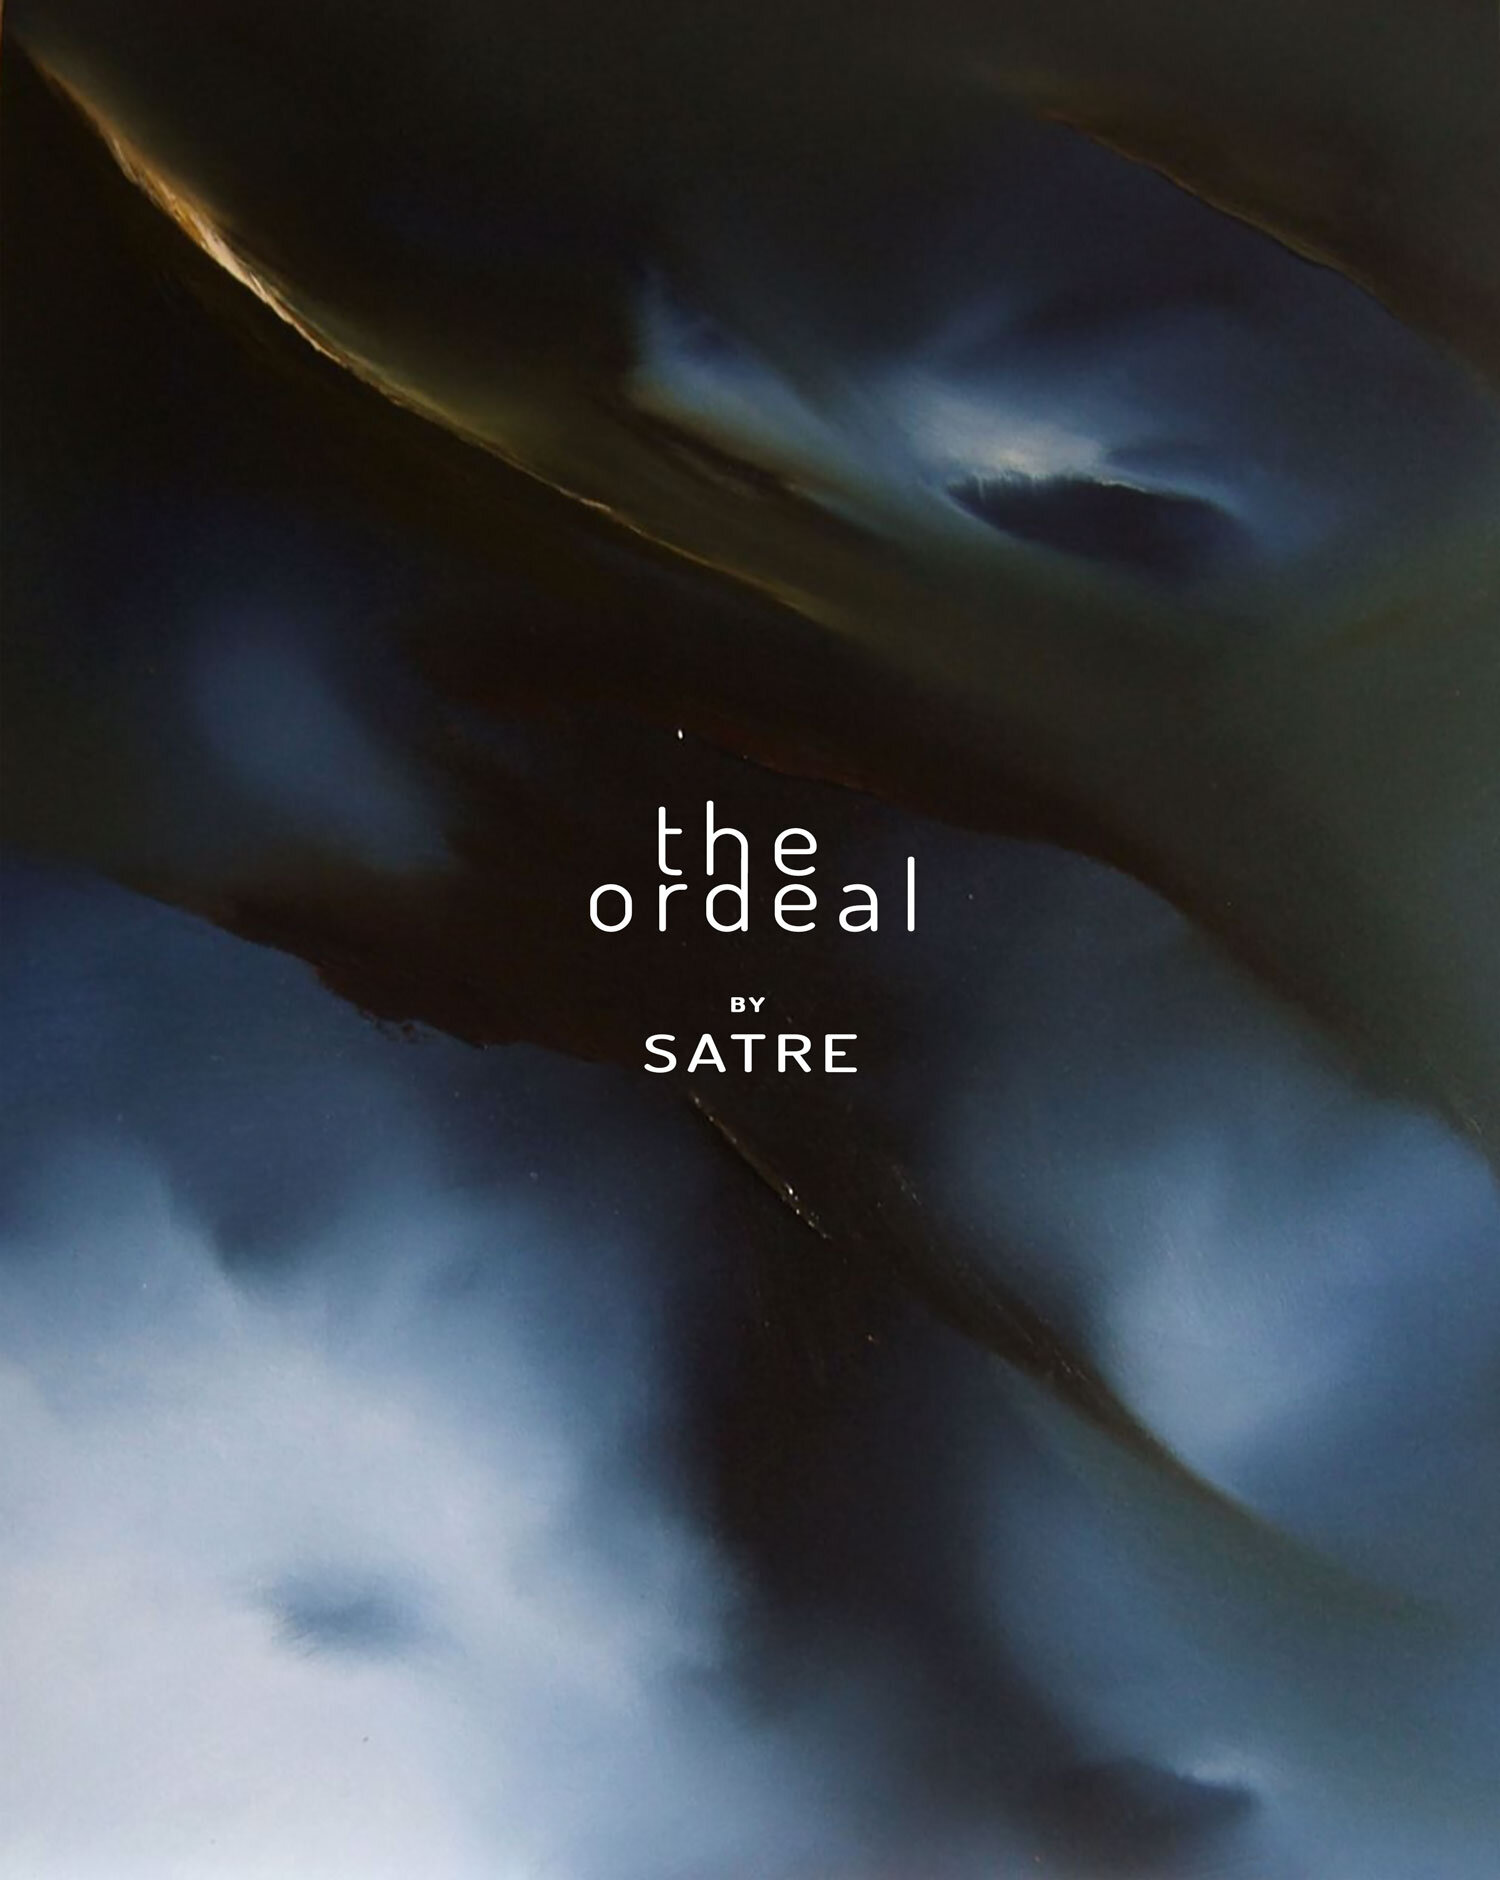 The-Ordeal-Front-1500-geir-satre.jpg